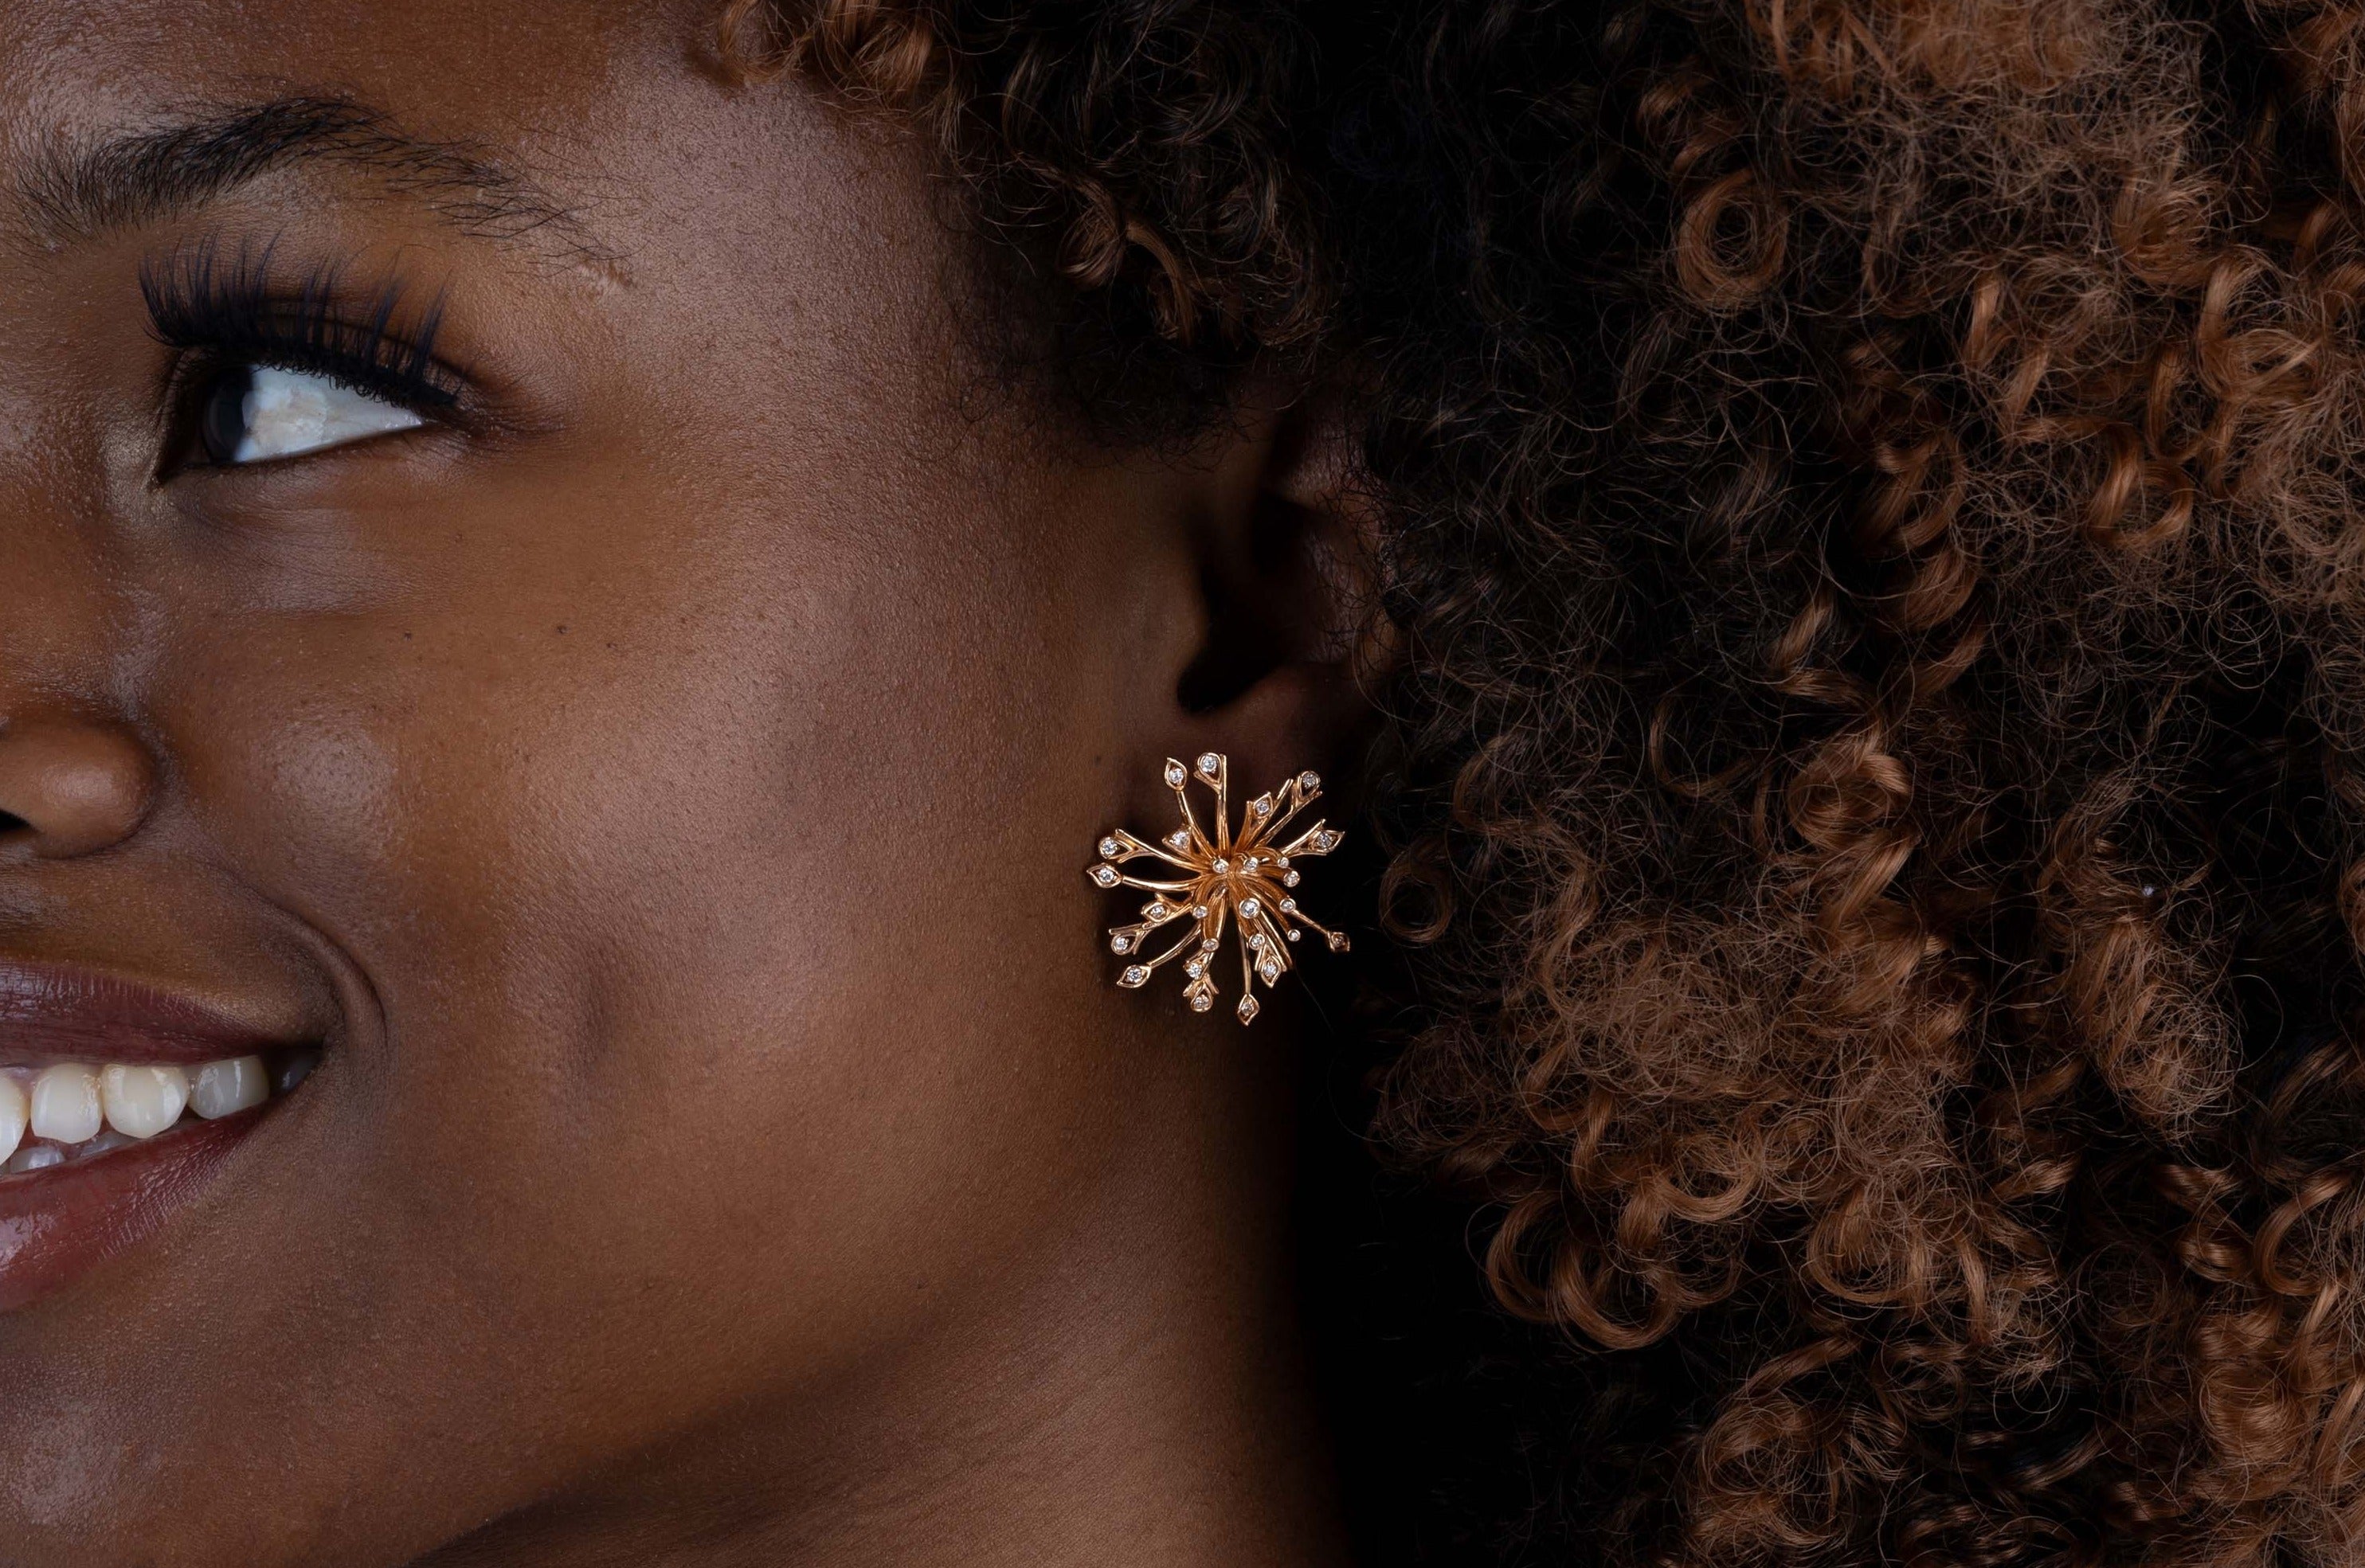 Yellow Gold Earrings, resembling a dandelion flower, with small round Diamonds, Large - Model shot